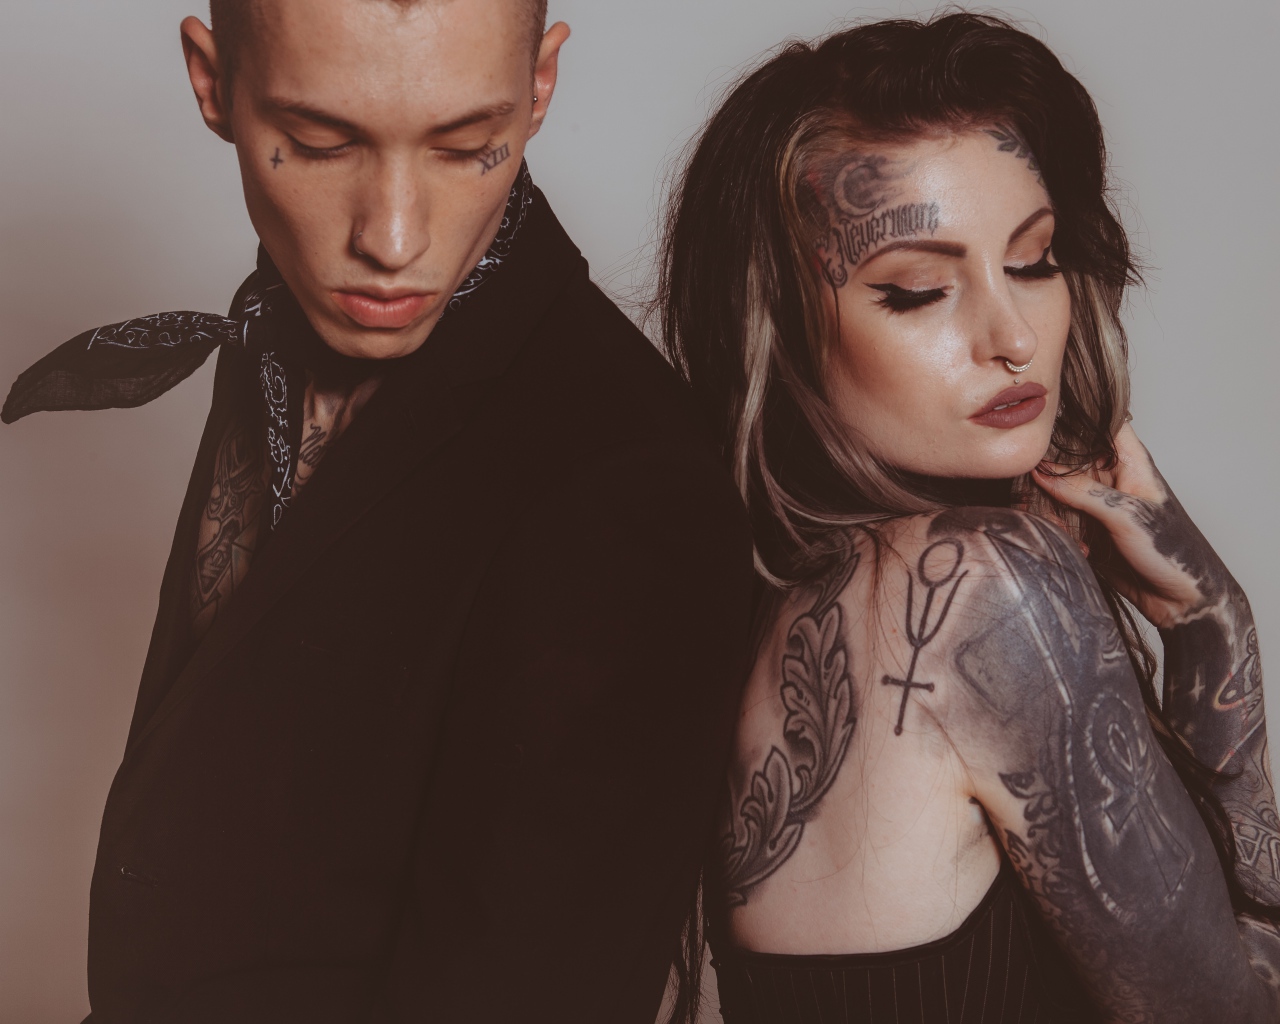 Girl and guy with tattoos on their bodies on a gray background